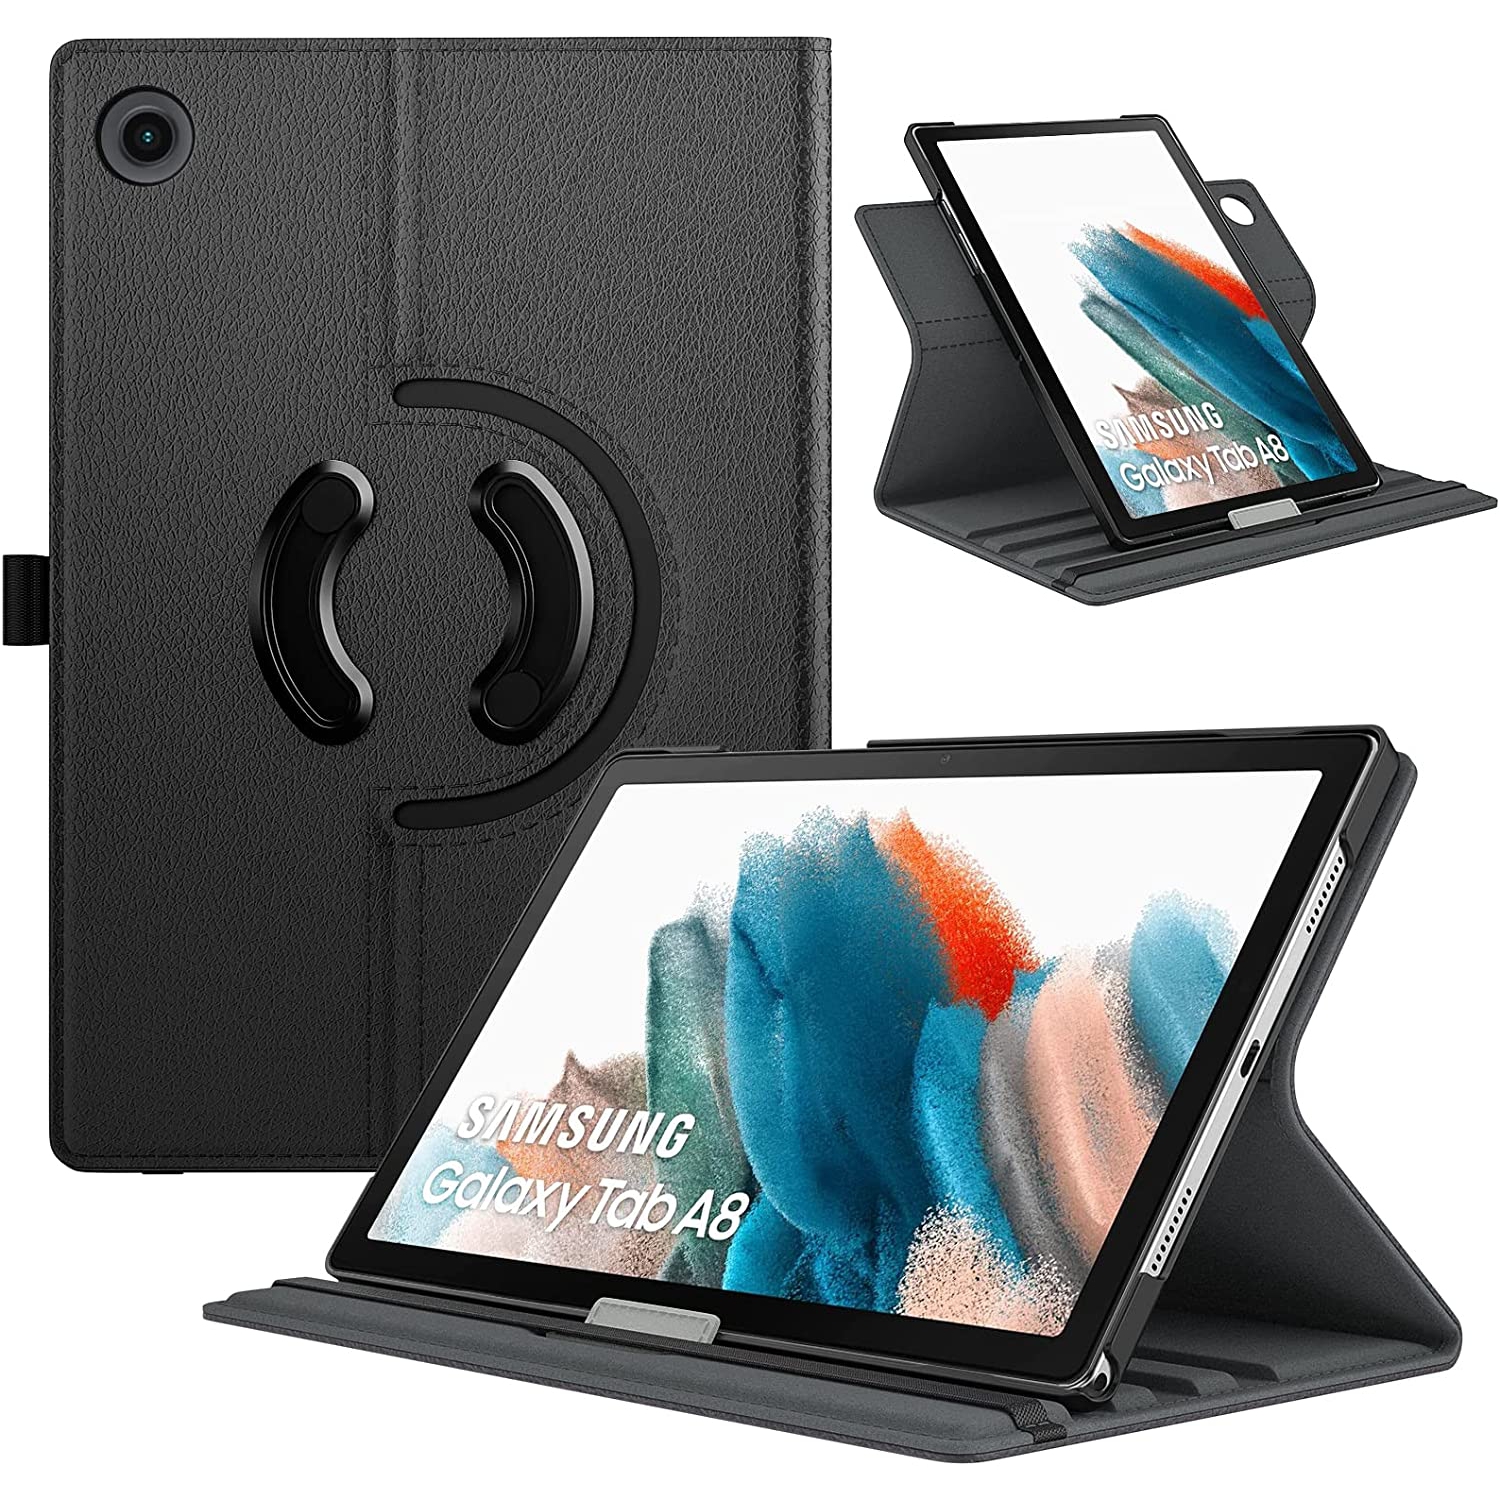 T Case for Samsung Galaxy Tab A8 10.5 Case 2022, Galaxy Tab A8 Case SM-X200/SM-X205, 90 Degree Rotating Swivel Leather Cover, Multiple Viewing Angles Folding Stand Case, Black